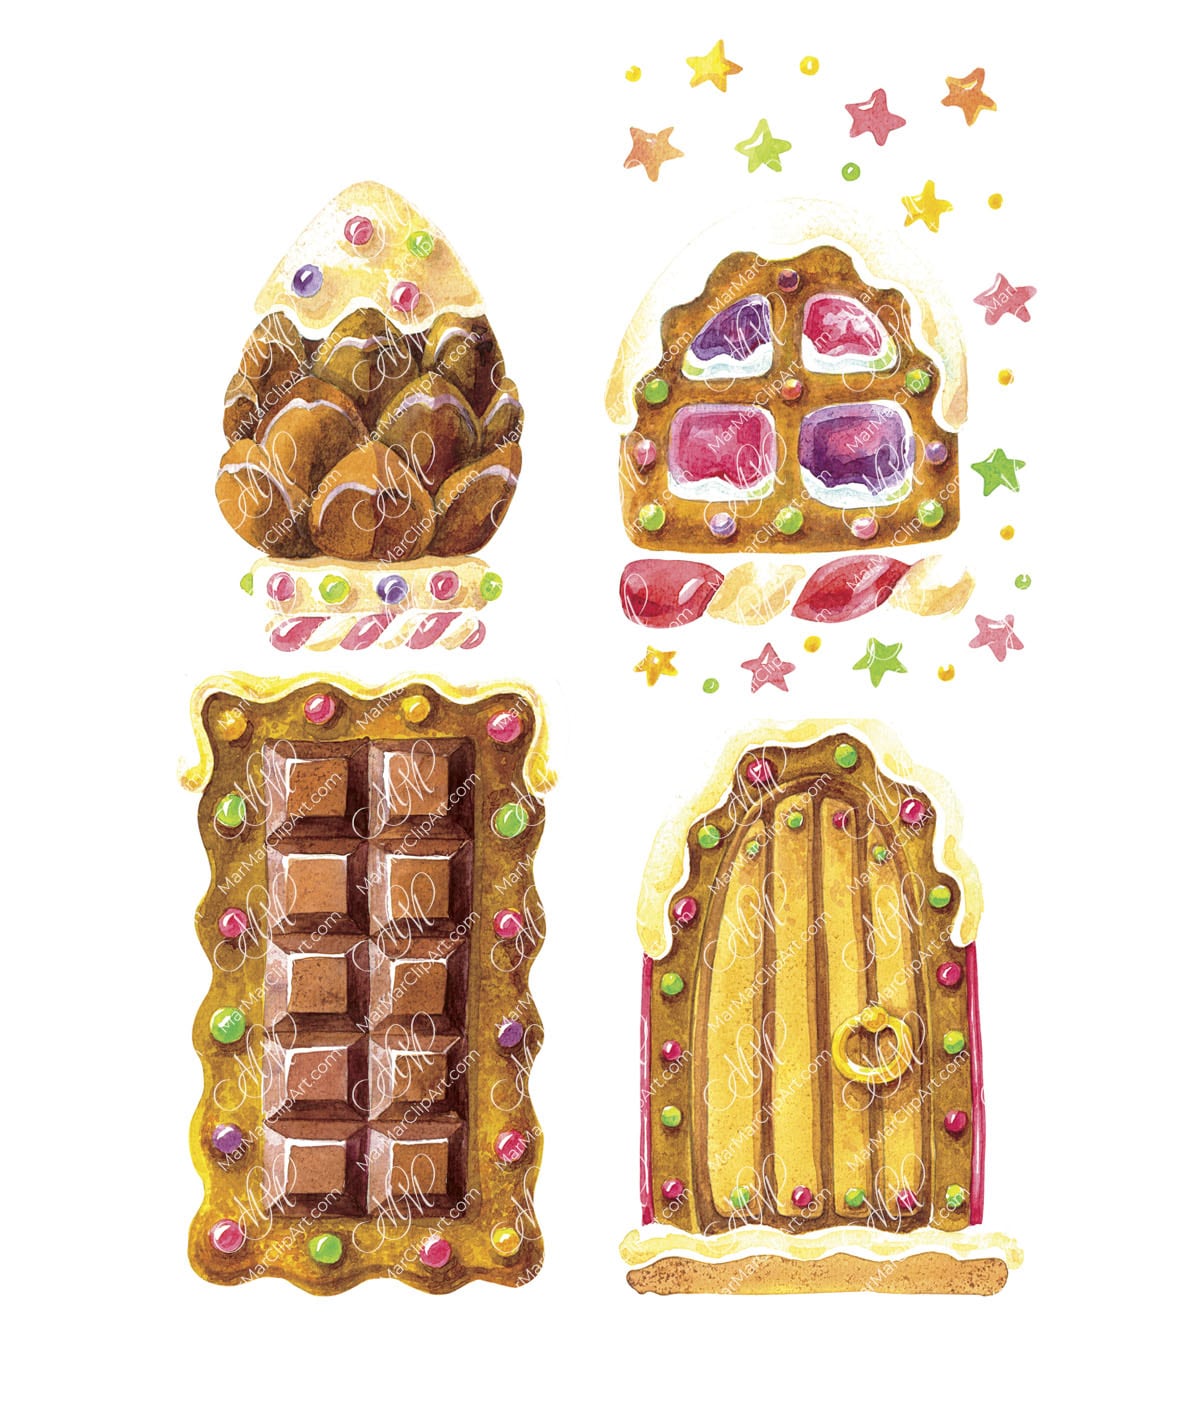 4 elements for a gingerbread house. Watercolor hand made illustration, can be used for your cards, scrapbooking, invitations, for your design works